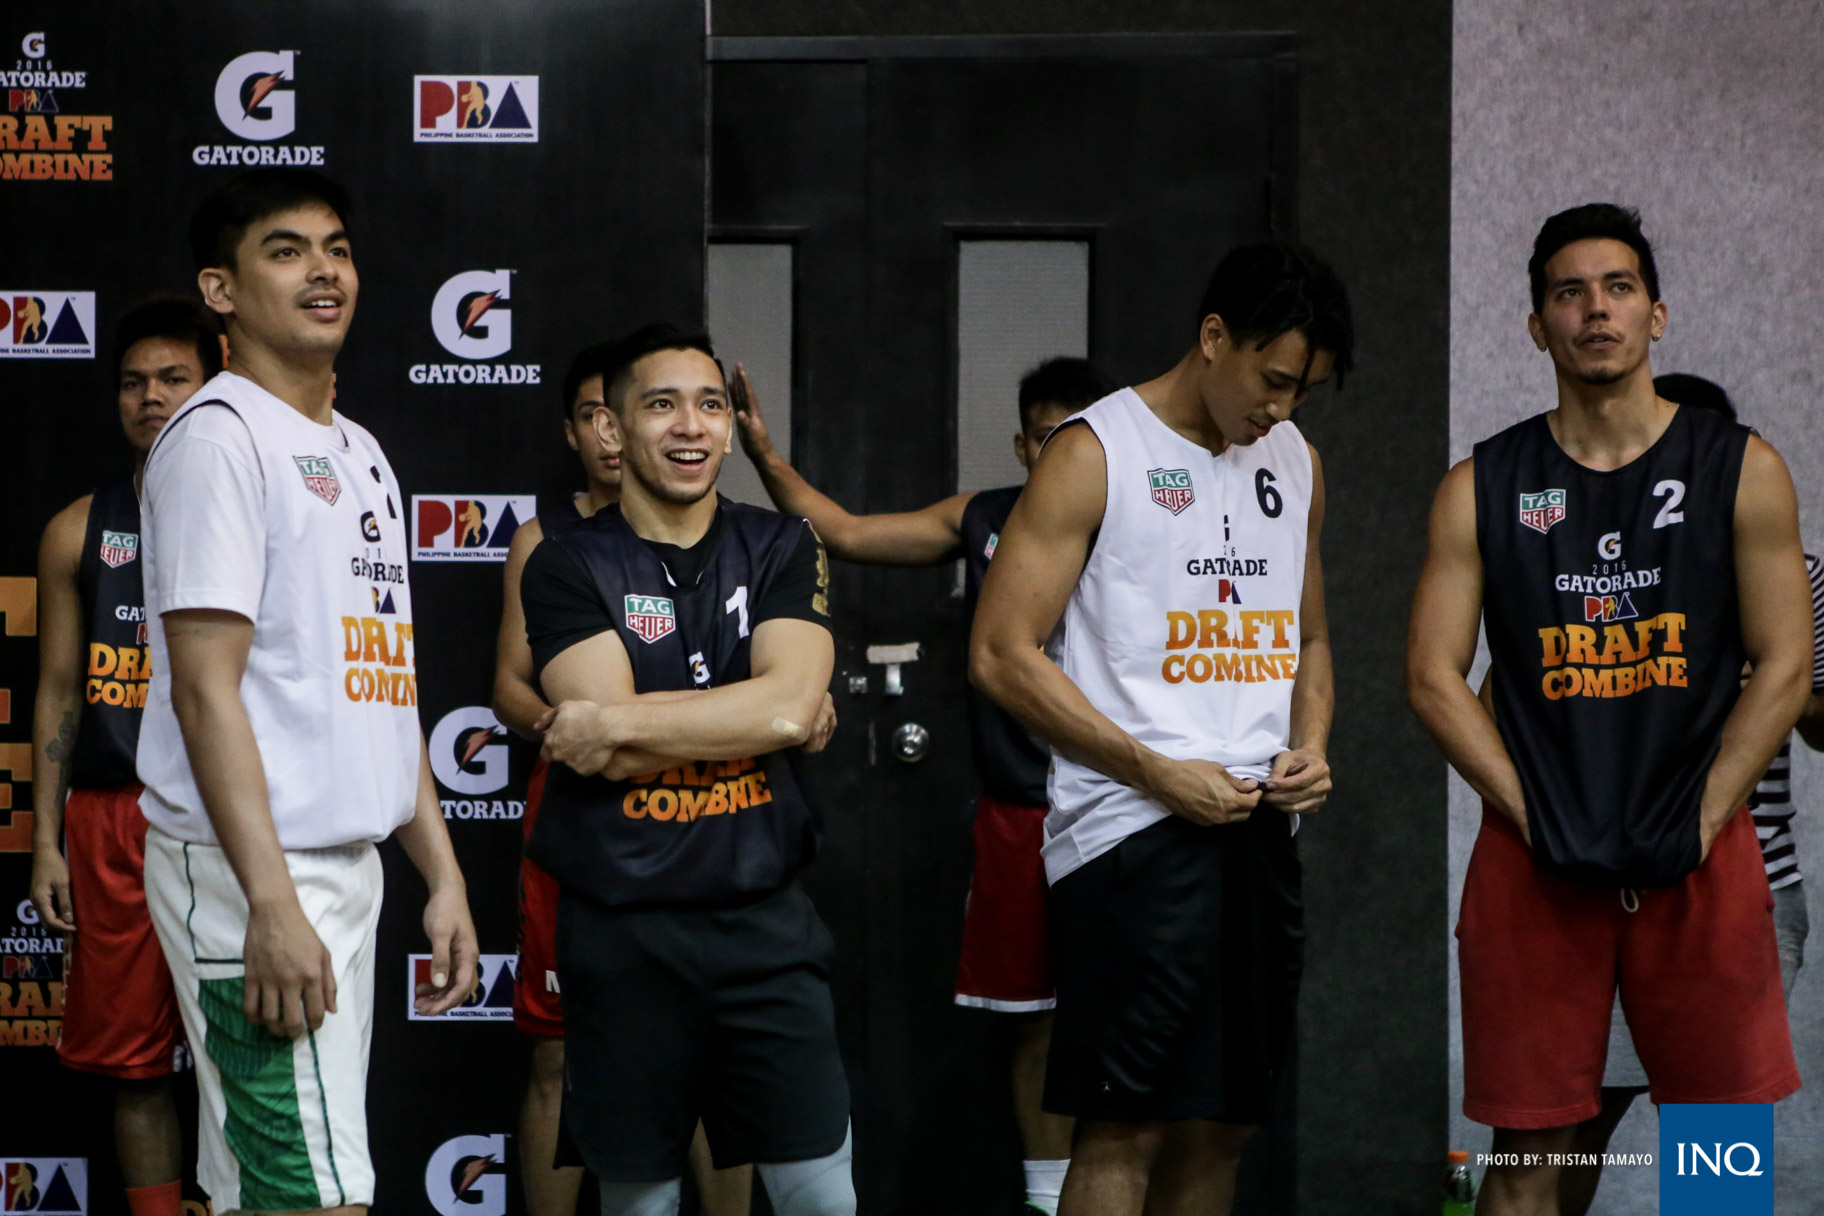 NCAA standouts Jonathan Grey and Paolo Pontejos at the 2016 PBA Rookie Draft Combine. Photo by Tristan Tamayo/INQUIRER.net